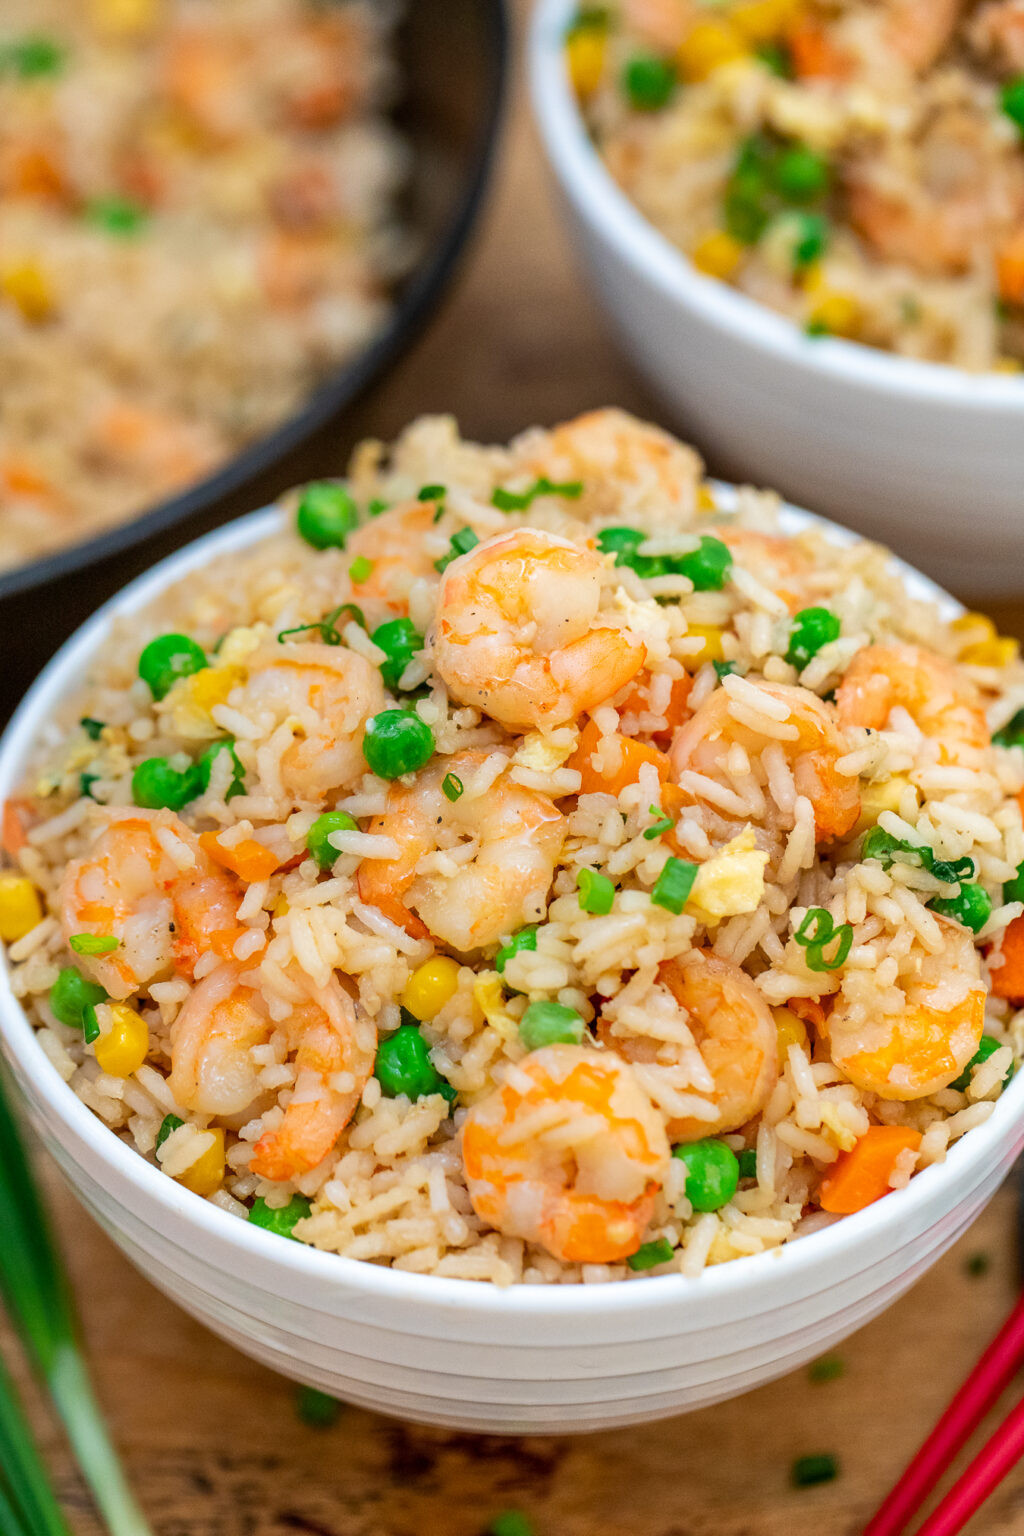 Fried Rice and Shrimp Luxury Shrimp Fried Rice Recipe [video] Sweet and Savory Meals